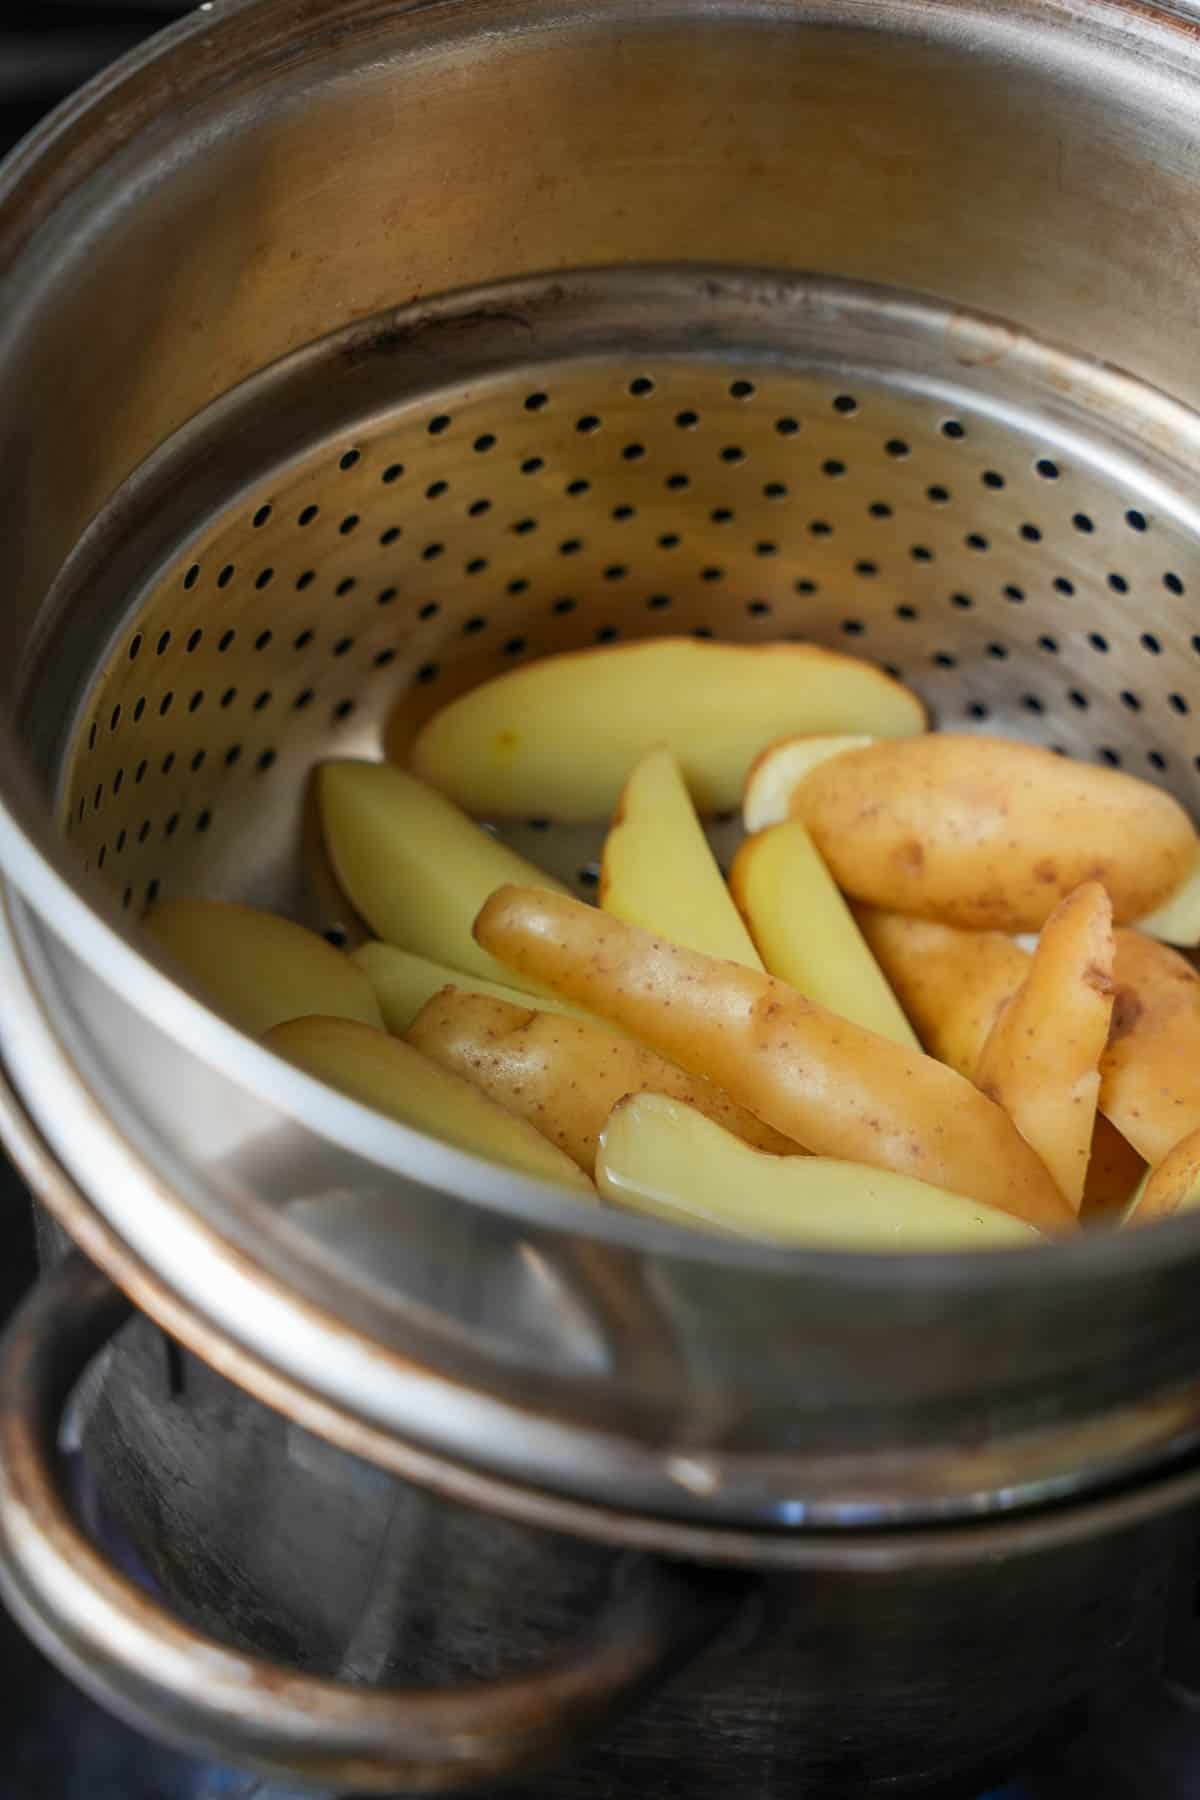 Potatoes steaming in a metal steamer on a stove.